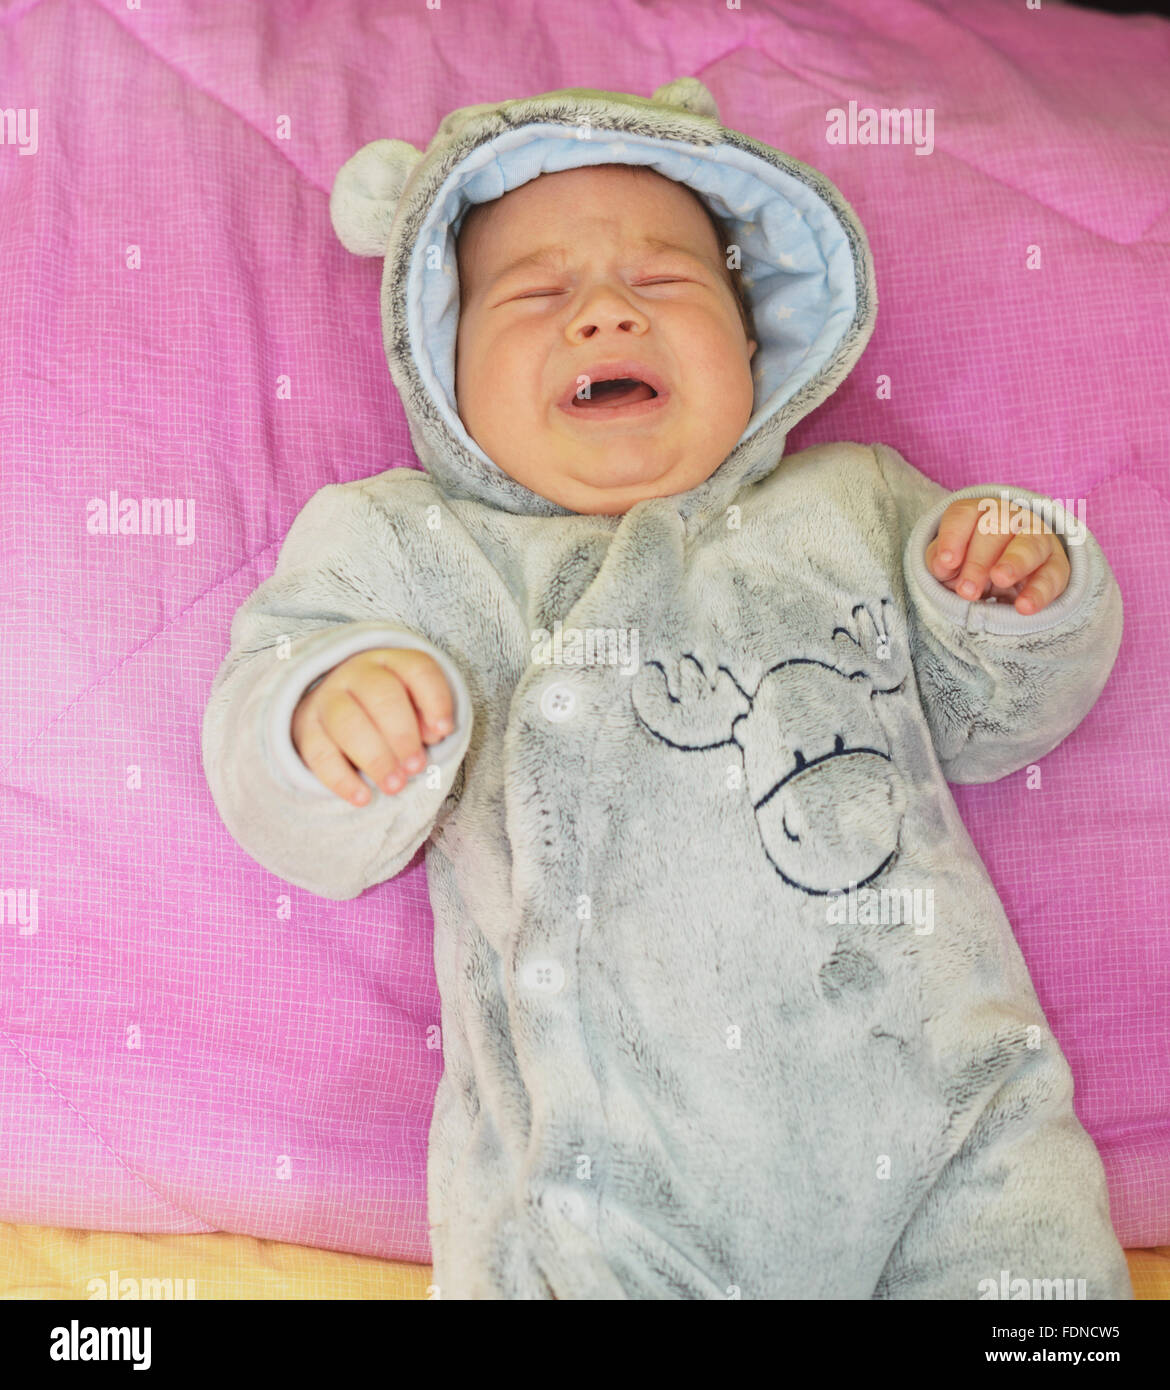 newborn baby boy crying in his bed Stock Photo